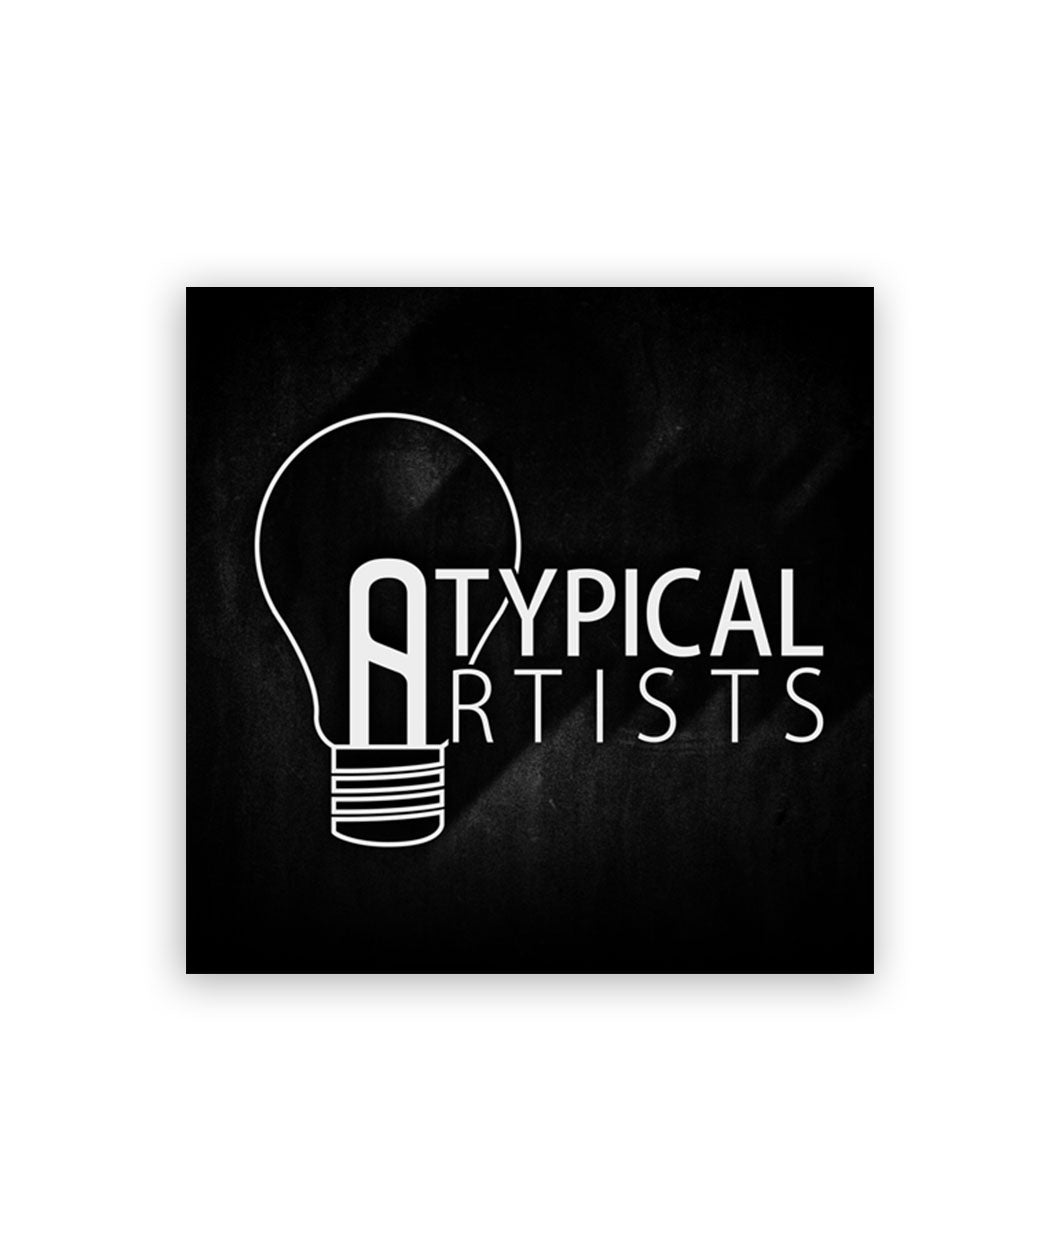 A album cover for the Atypical Artists theme music pack which is a black background with a white outline of a lightbulb and the words "Atypical Artists".